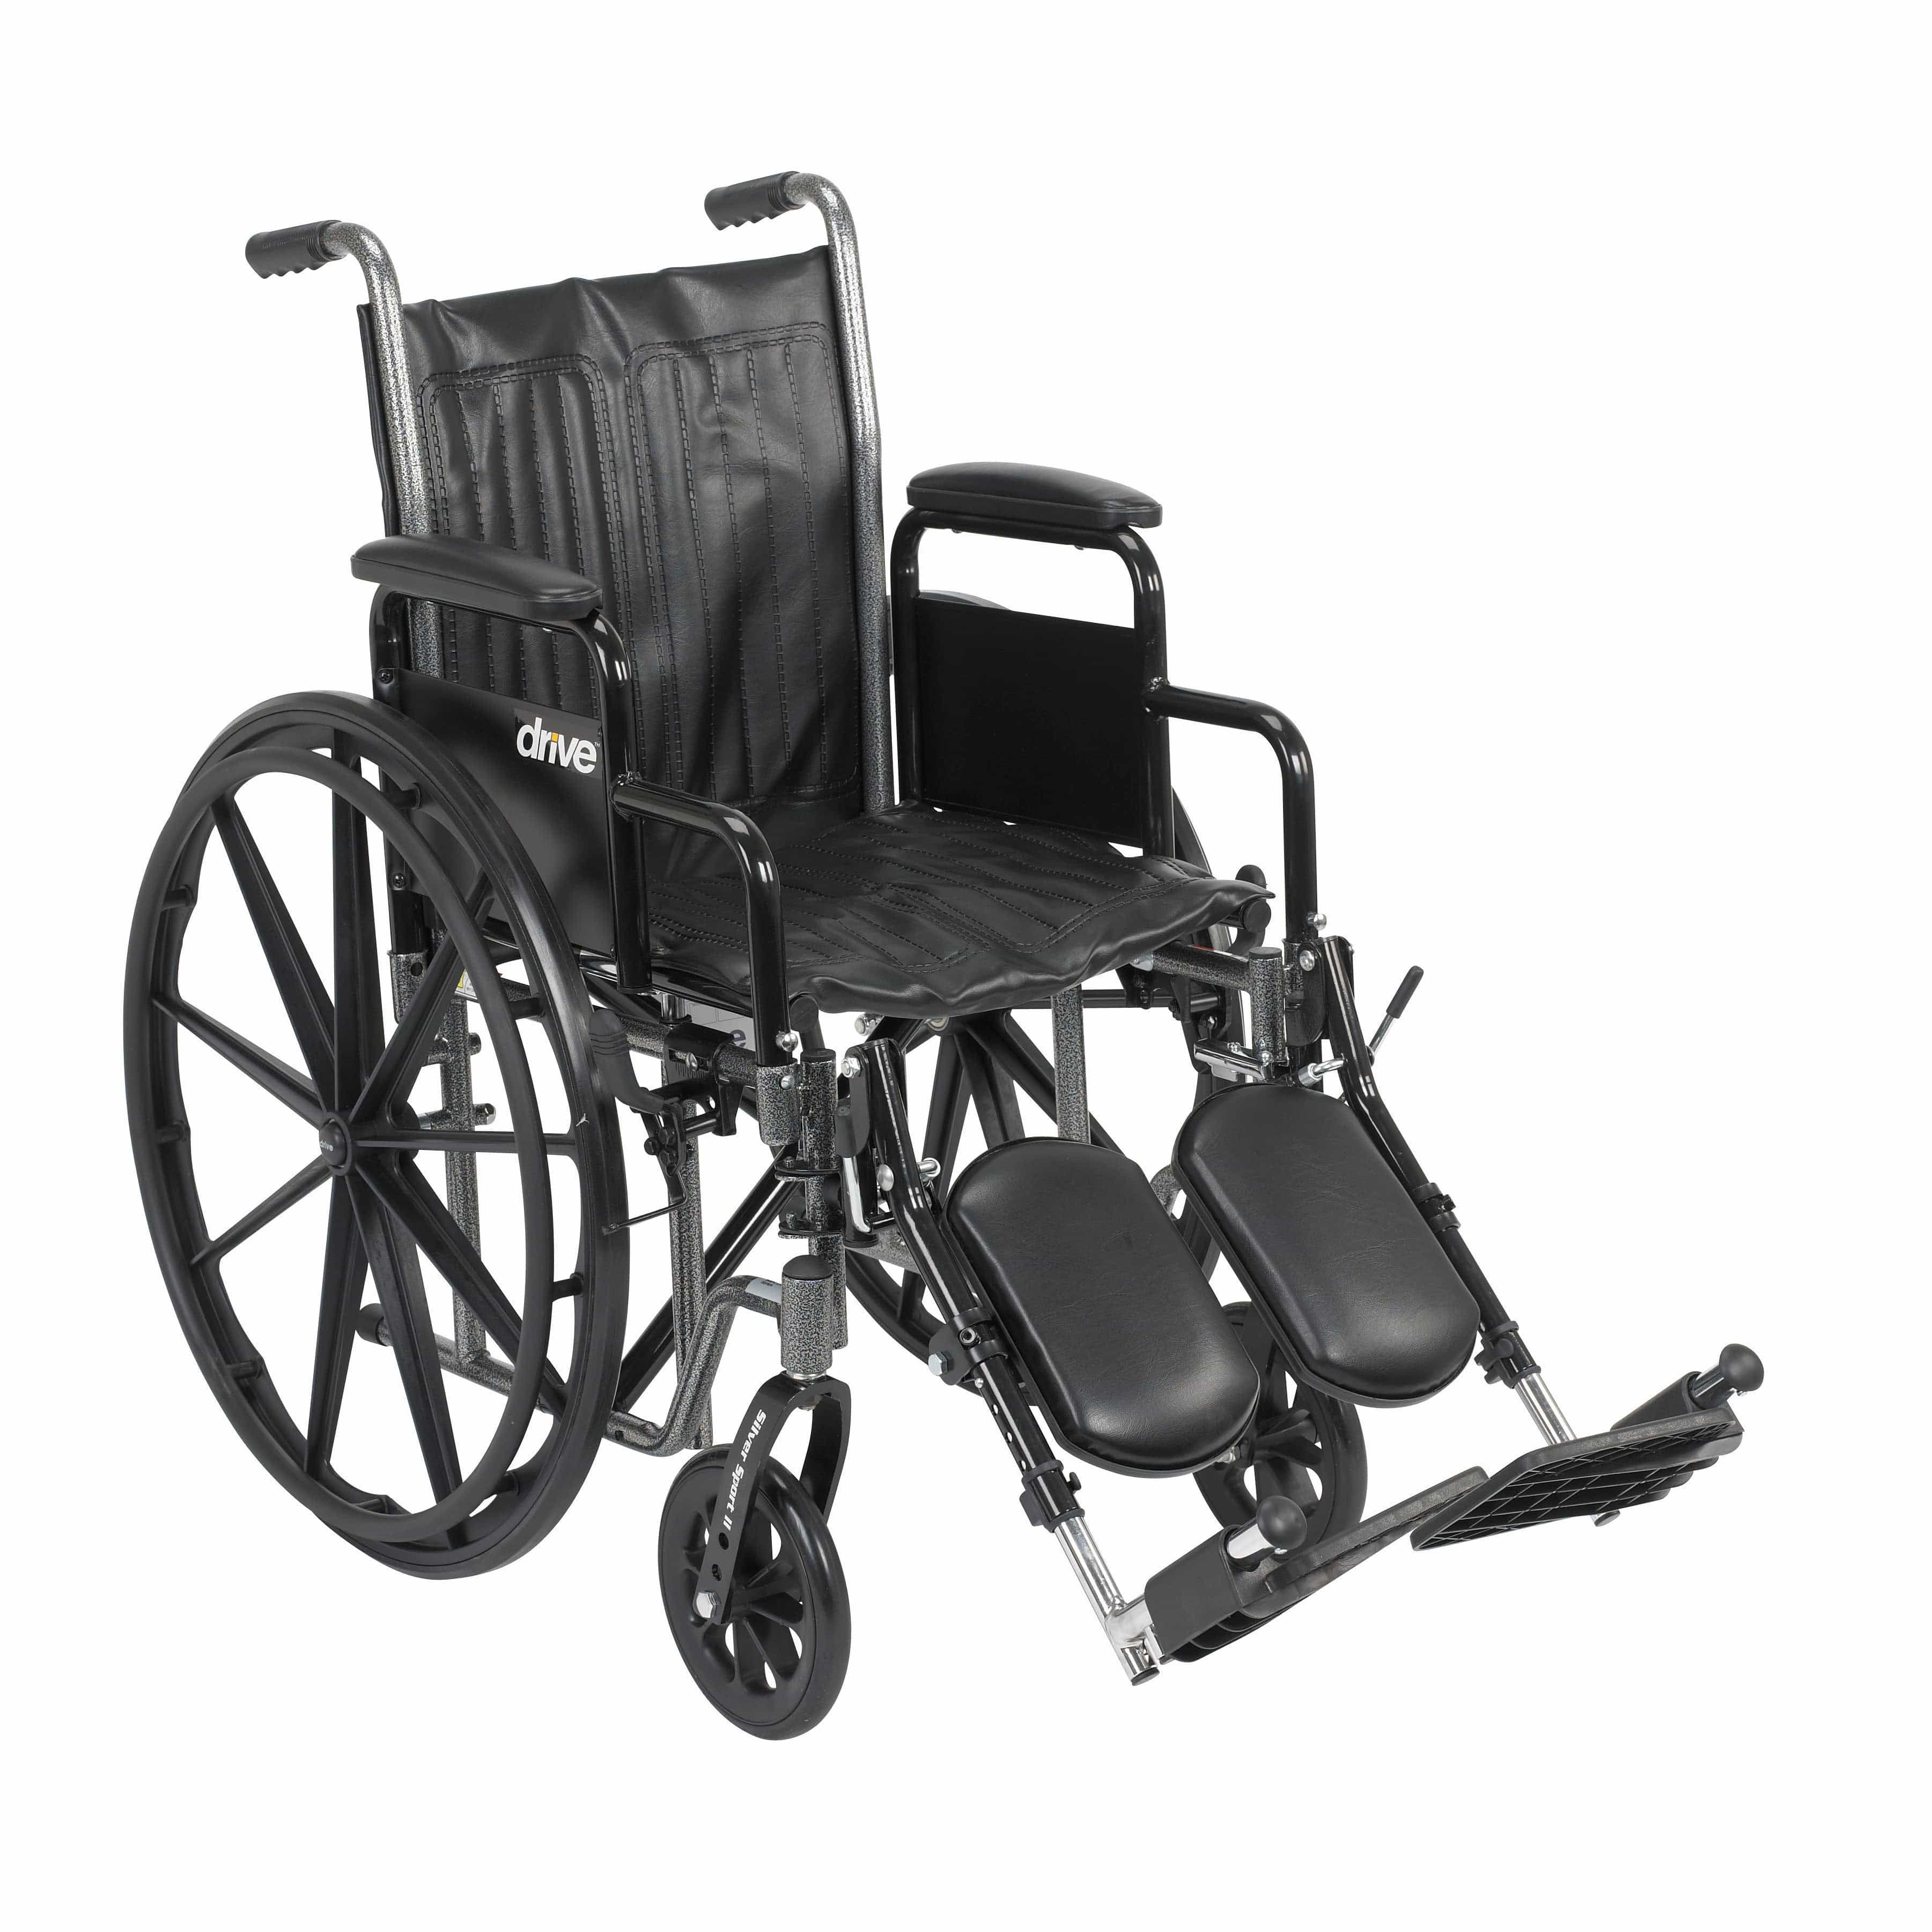 Drive Medical Wheelchairs/Standard Wheelchairs Detachable Desk Arms and Elevating Leg Rests / 16" Seat Drive Medical Silver Sport 2 Wheelchair